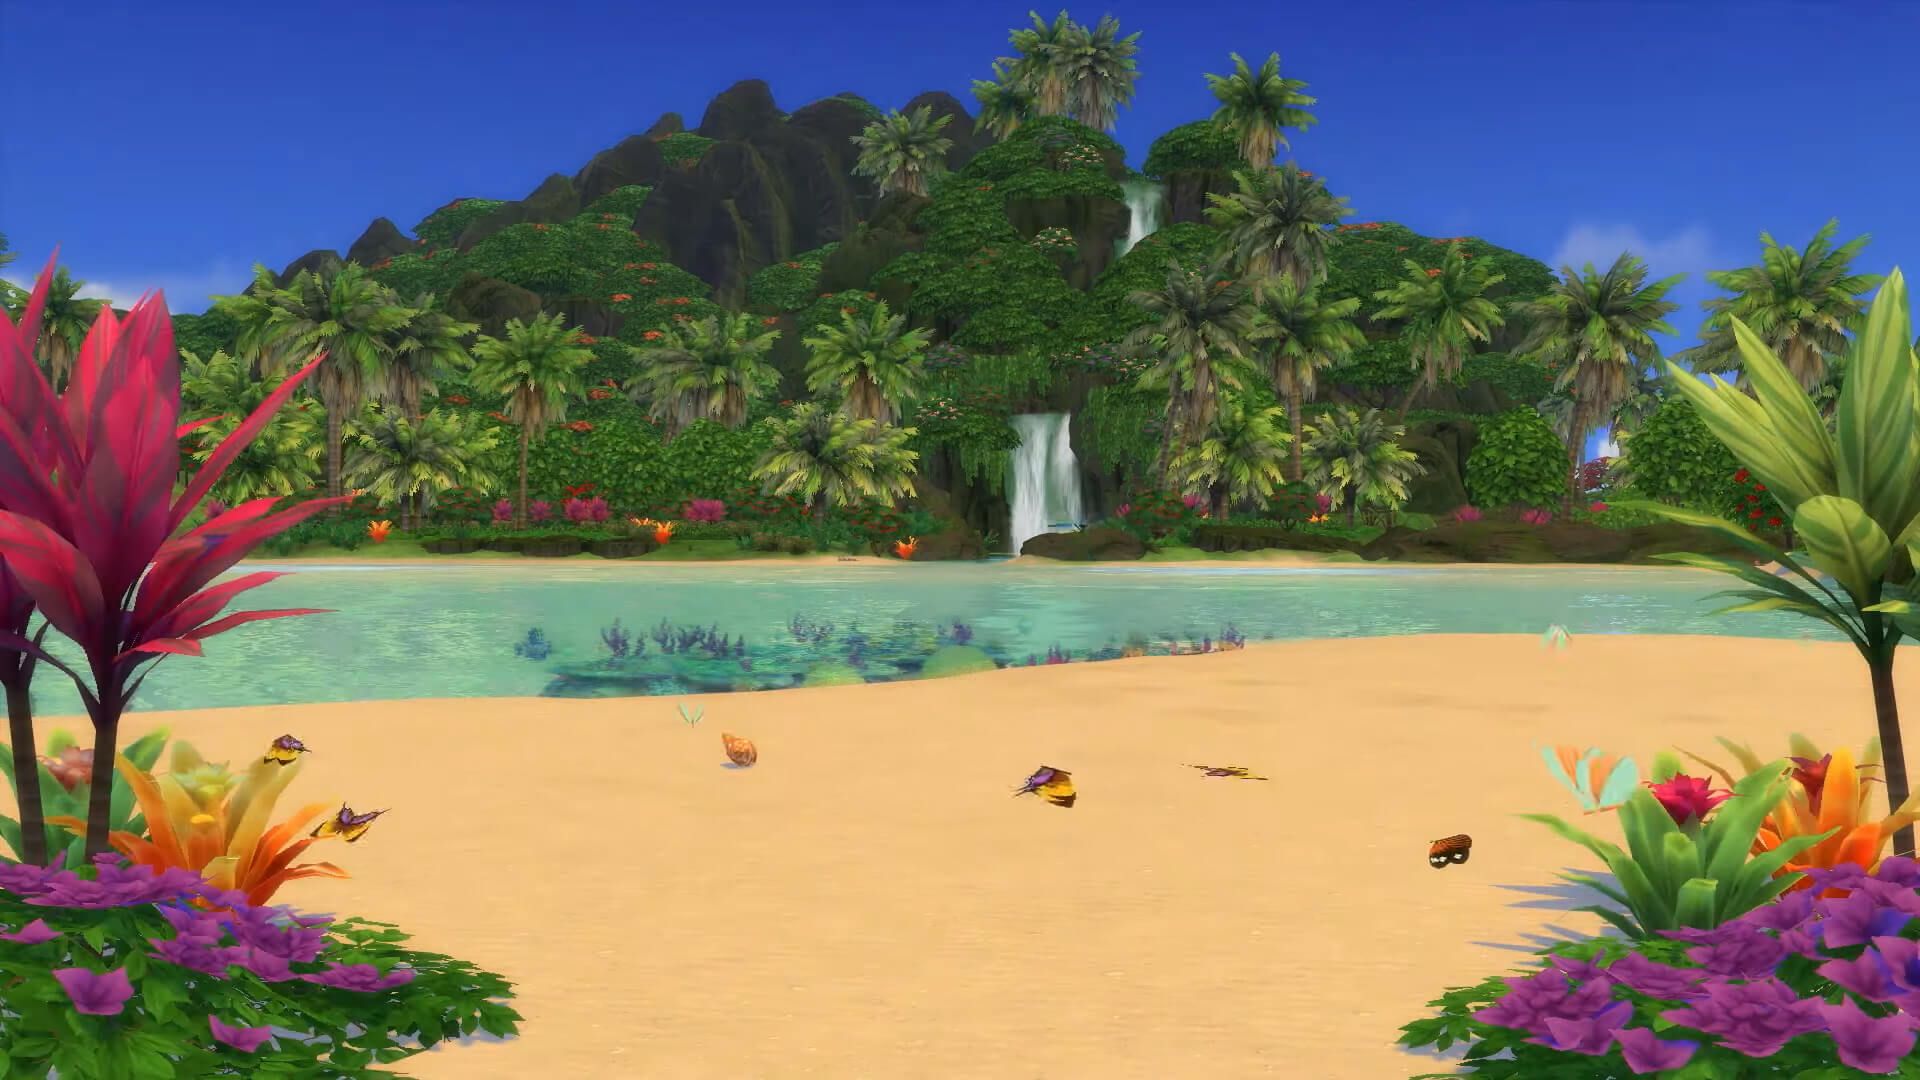 The Sims 4 Island Living: First Impression